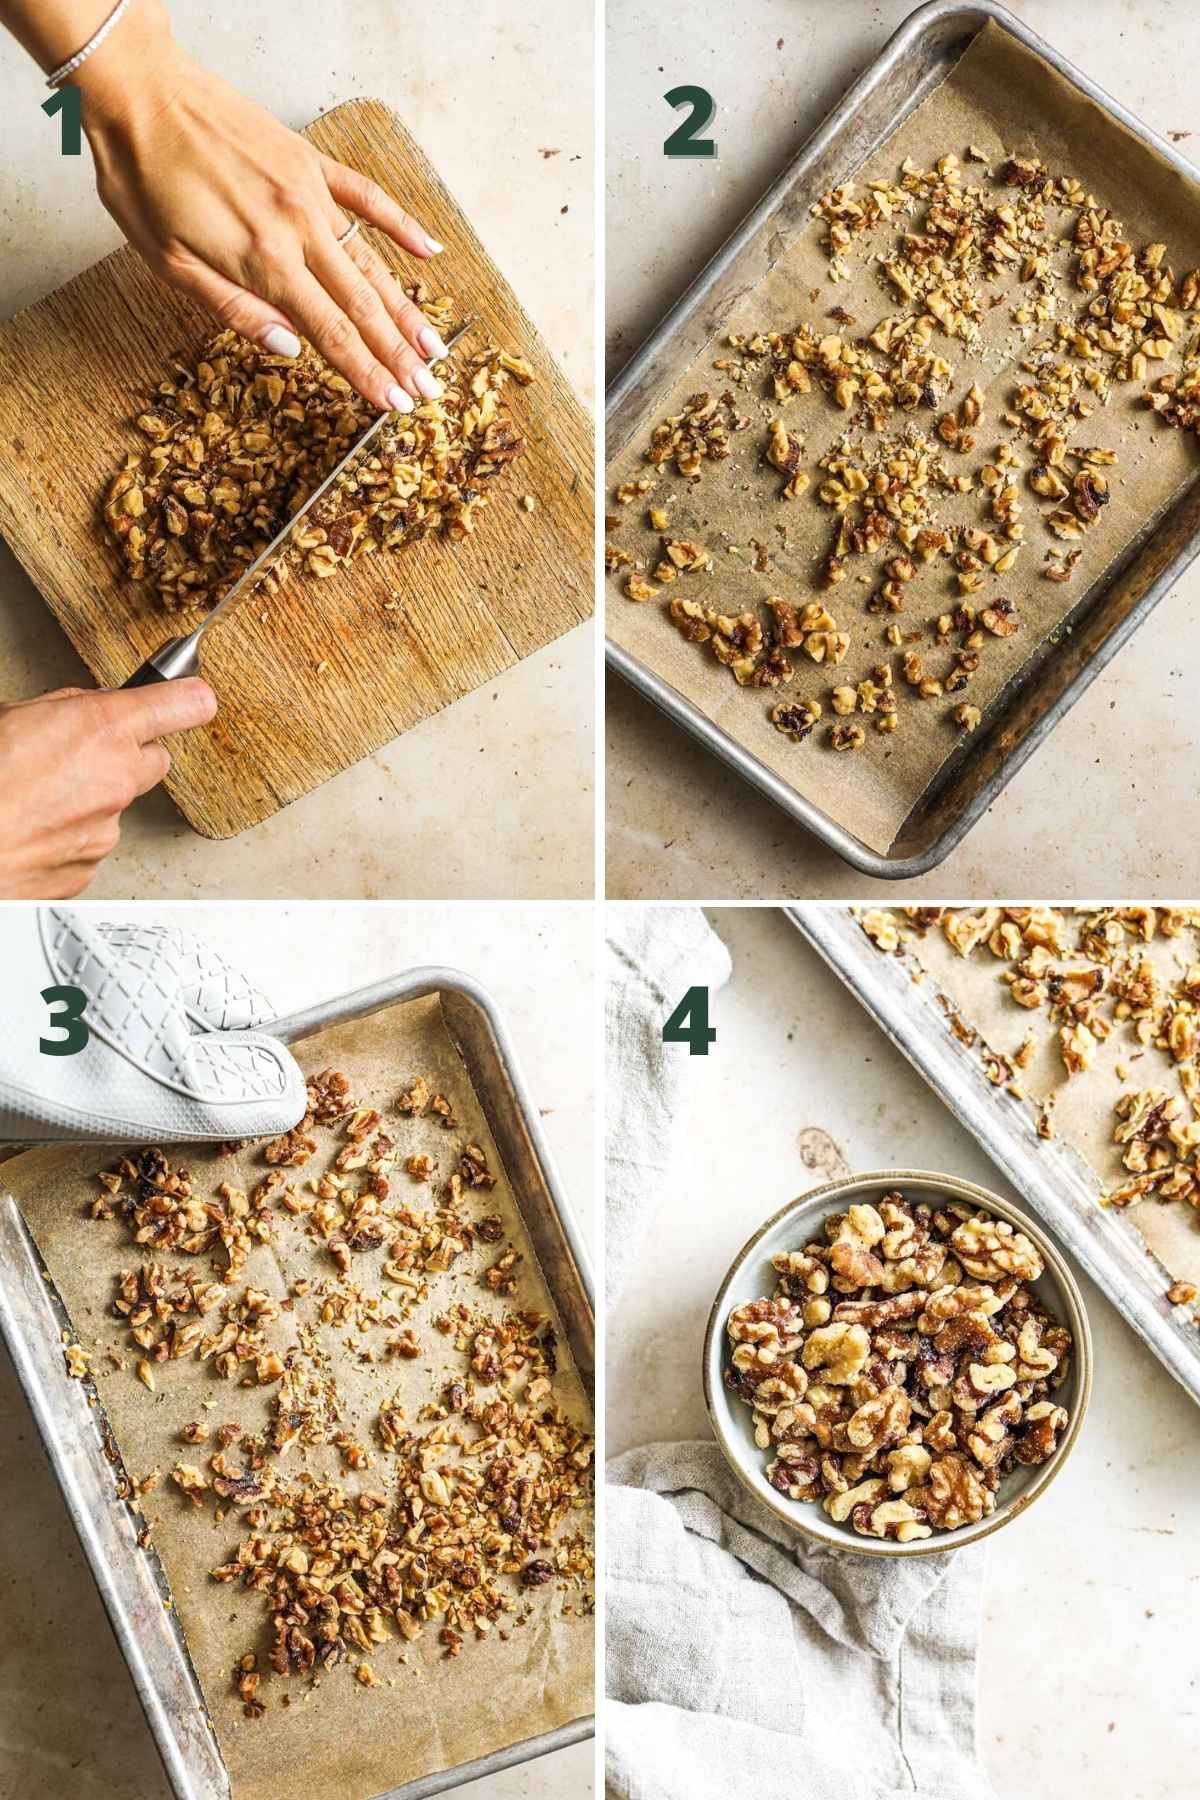 Steps to make roasted walnuts, including chopping the walnuts, placing parchment paper on a baking sheet, spreading walnuts on the baking sheet, toasting in the oven, and serving or storing.